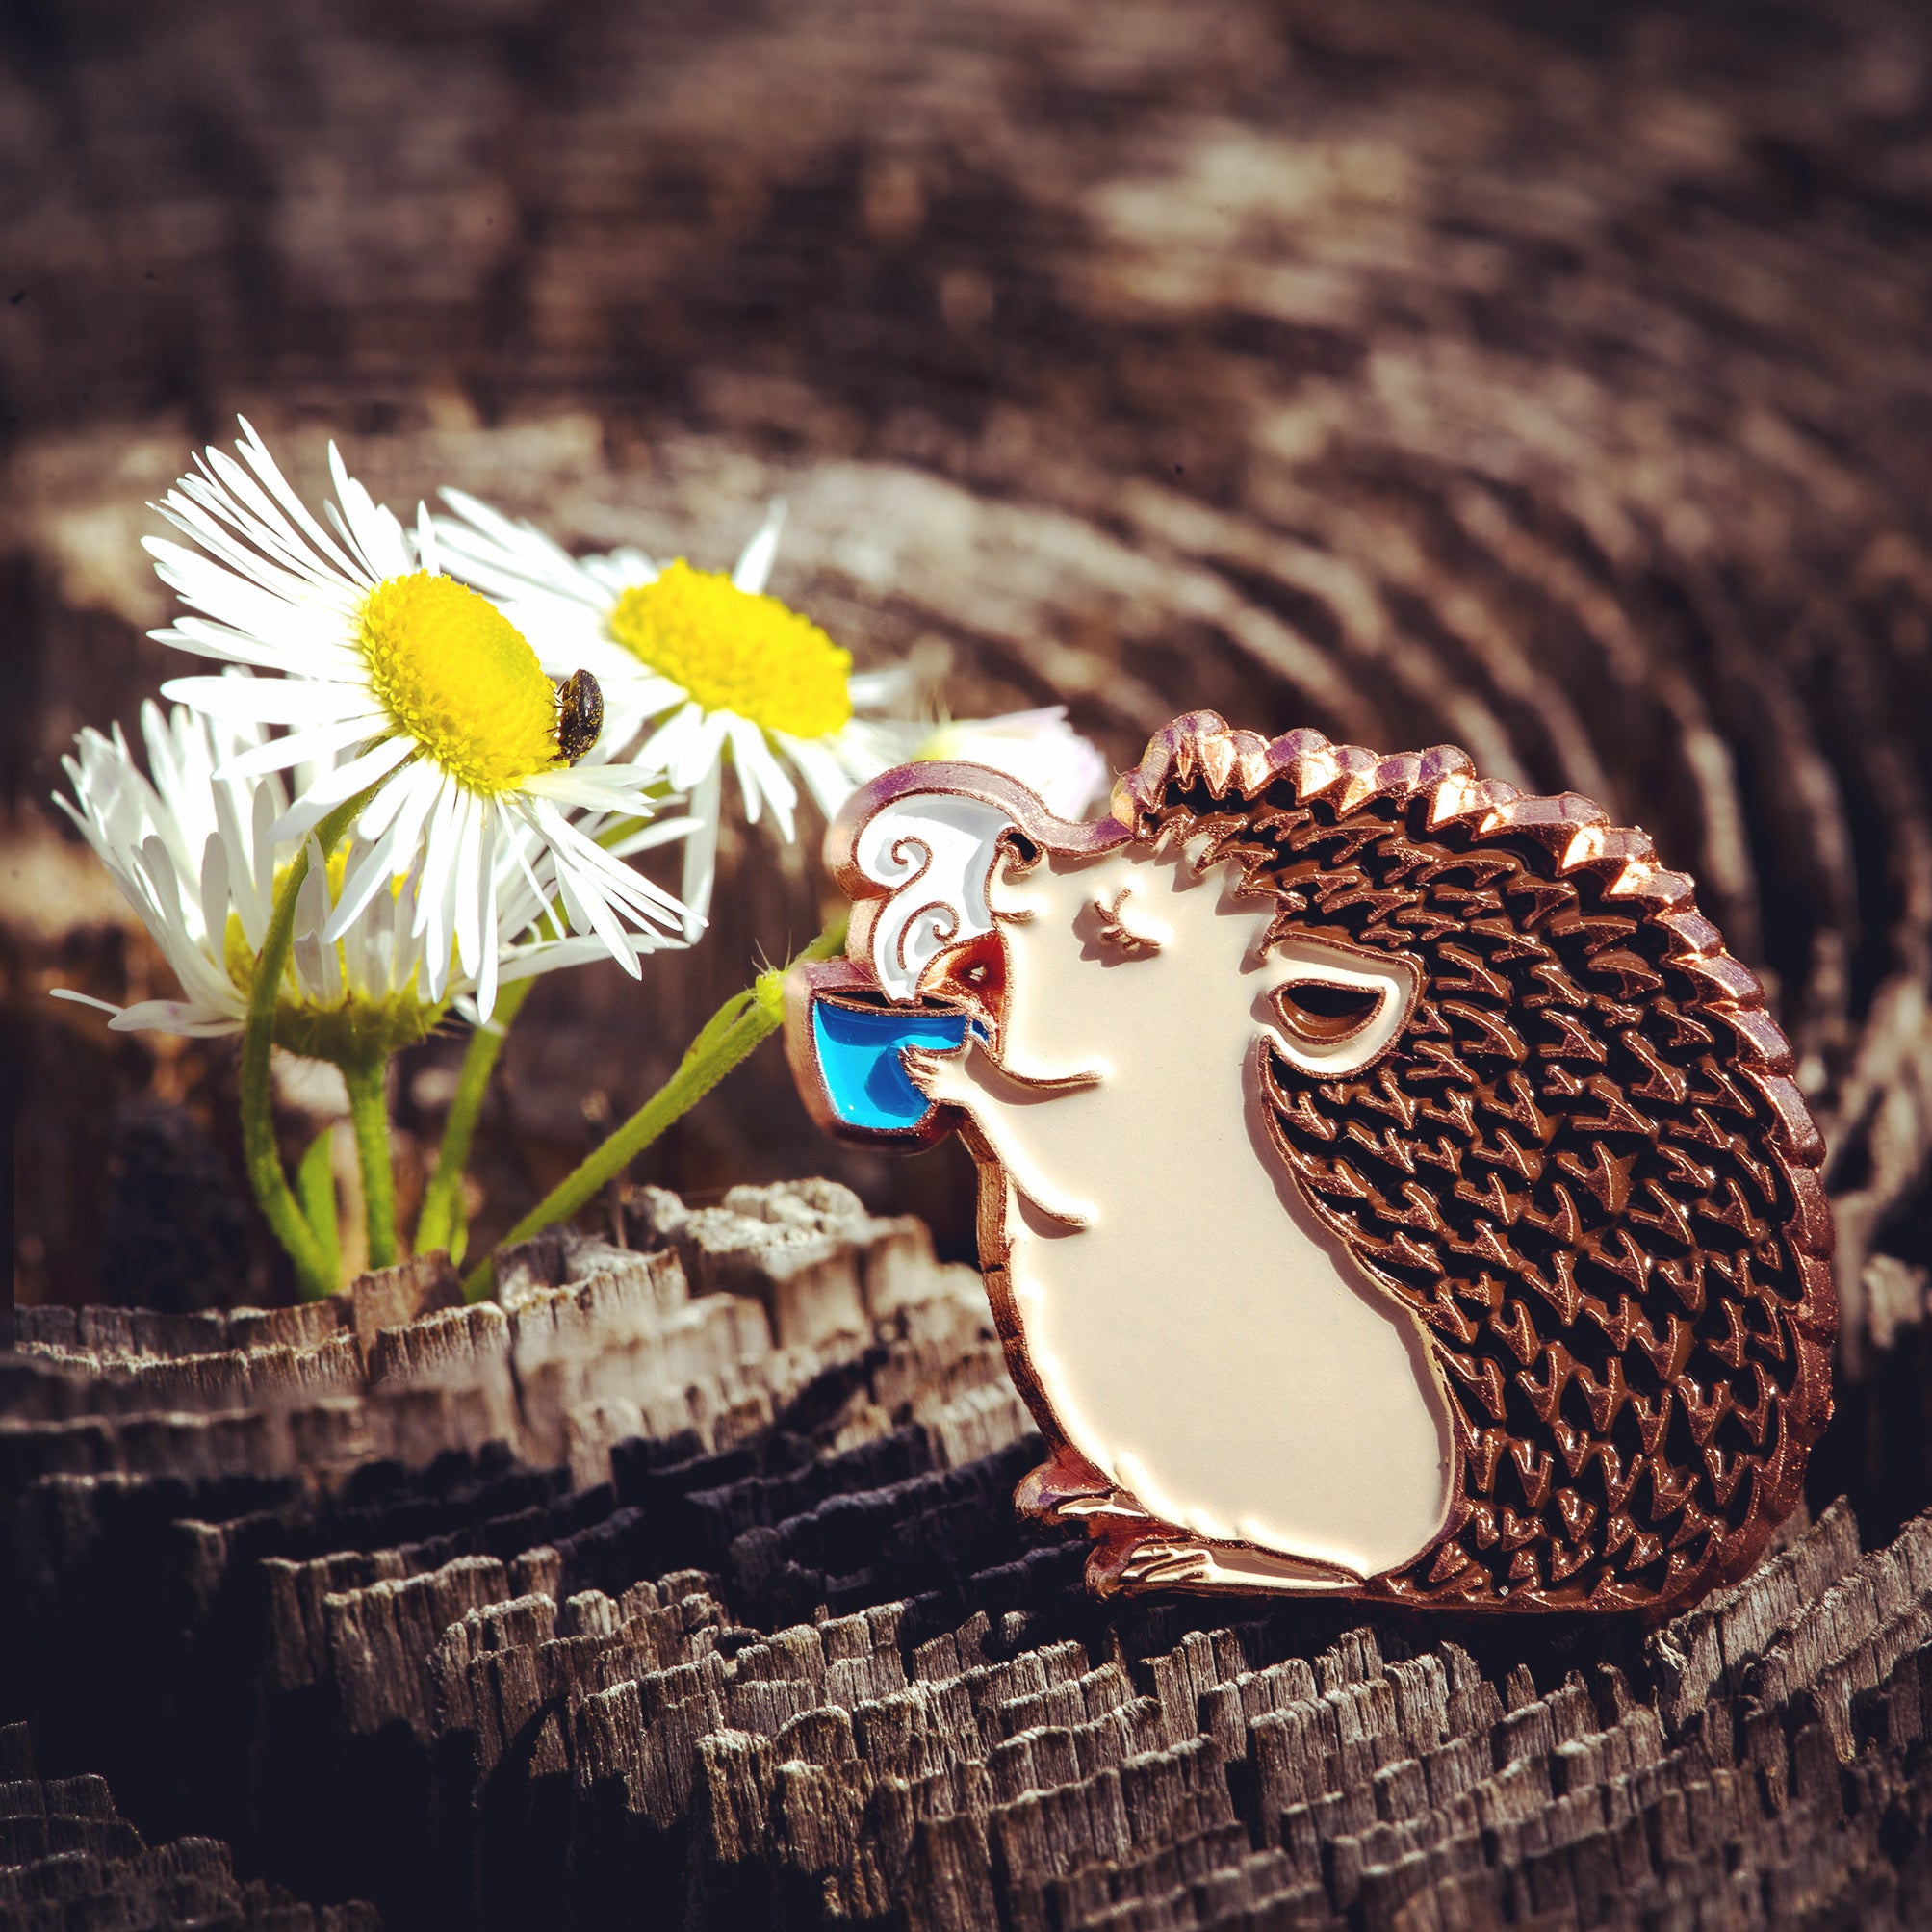 An enamel pin of a hedgehog enjoying a steaming blue mug of coffee, next to some daisies and a beetle.